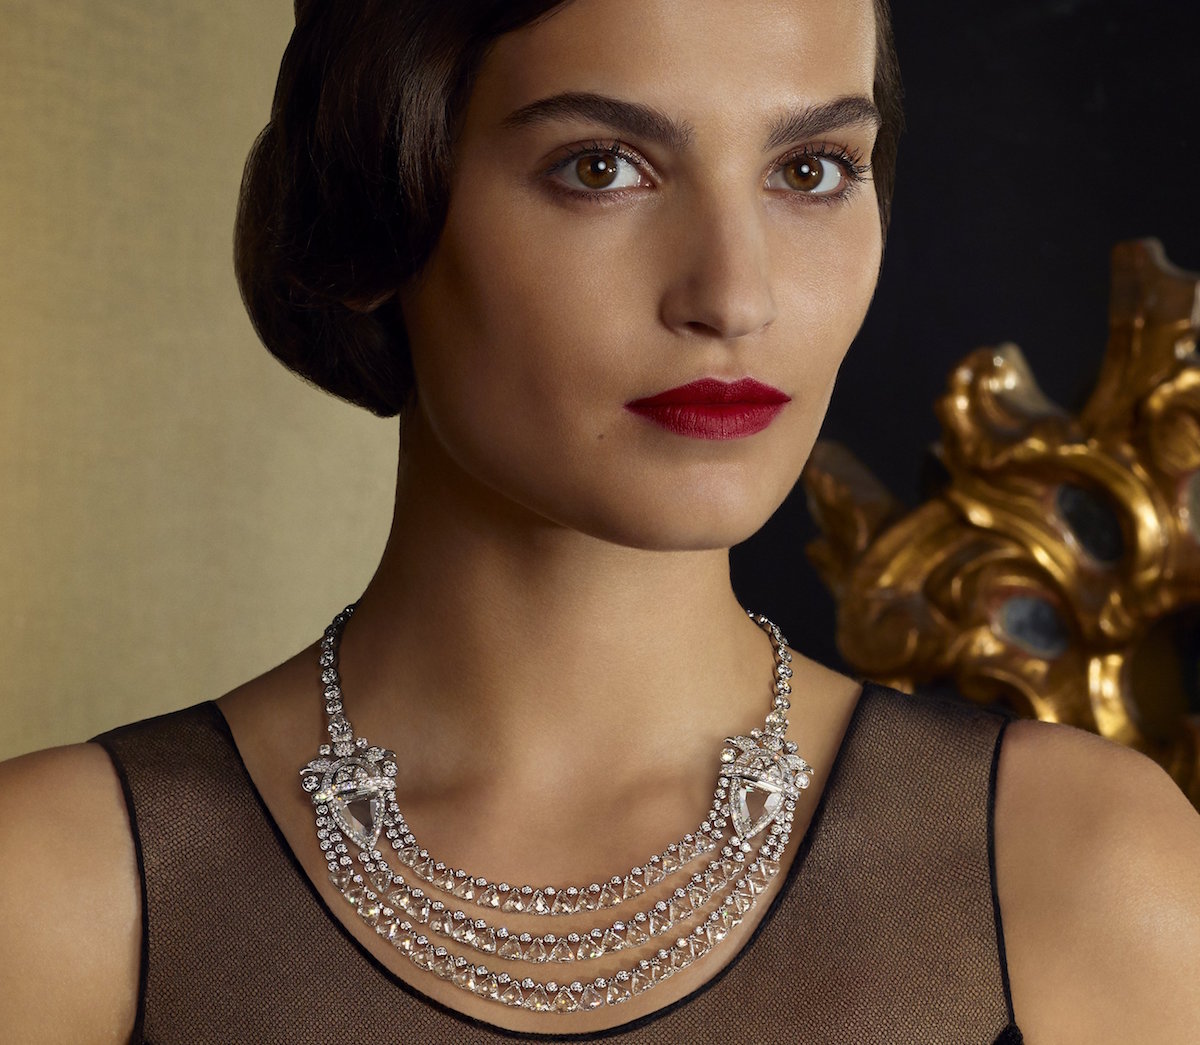 The Inspiration Behind Le Paris Russe de Chanel High Jewellery - MOJEH